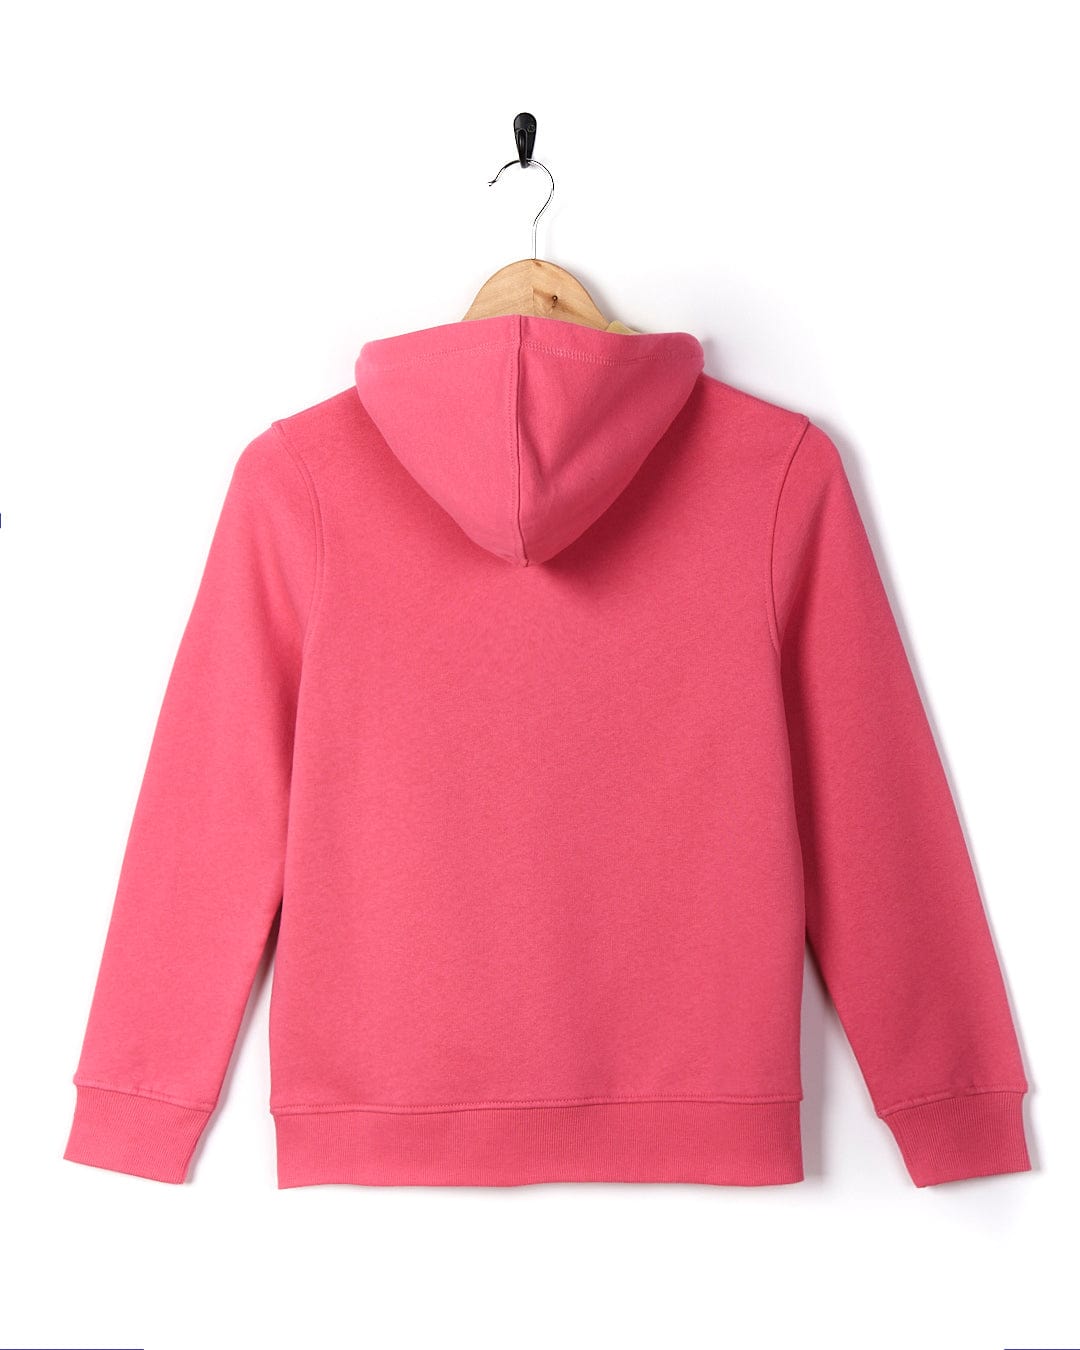 A Seabed - Kids Pop Hoodie - Pink by Saltrock hanging on a hanger.